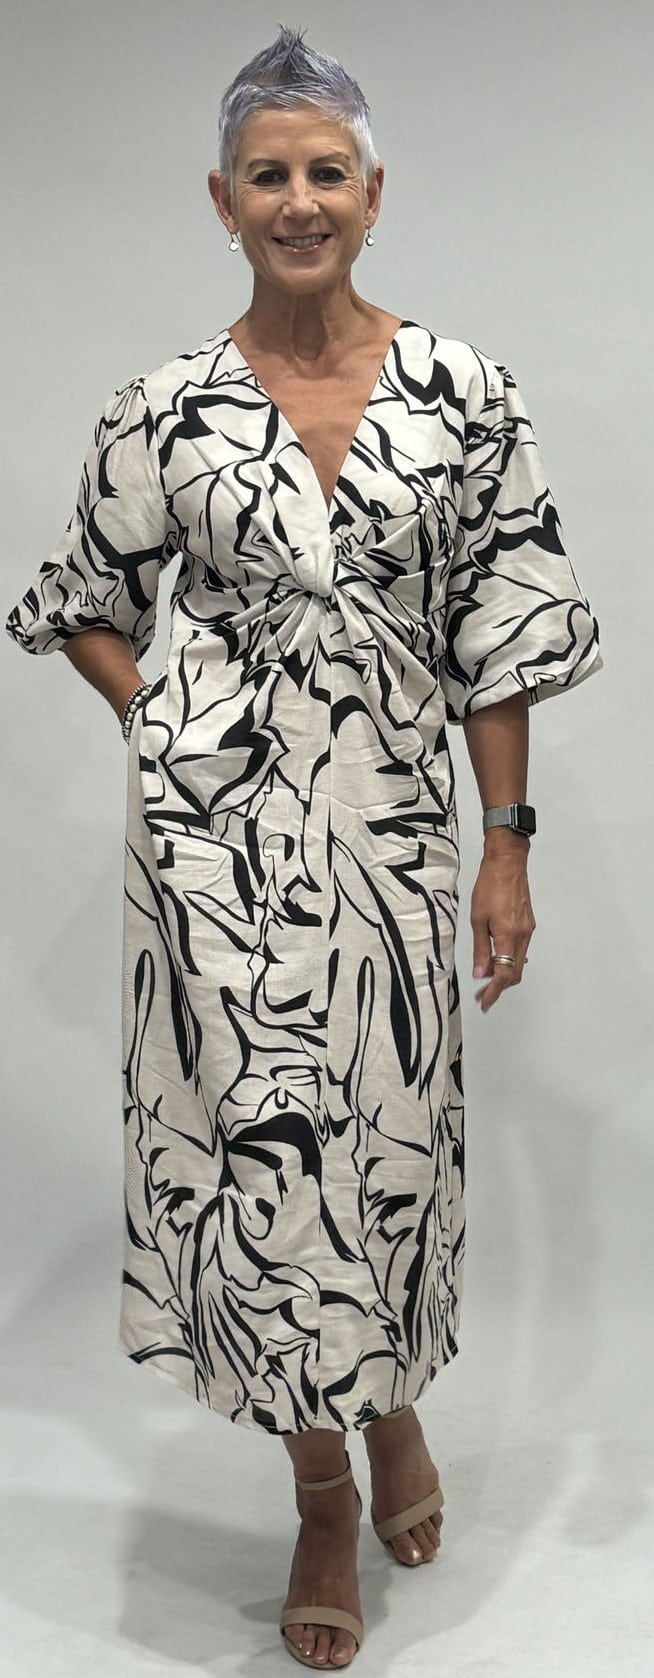 LA STRADA V NECK WITH KNOT DETAIL ABSTRACT PRINT DRESS